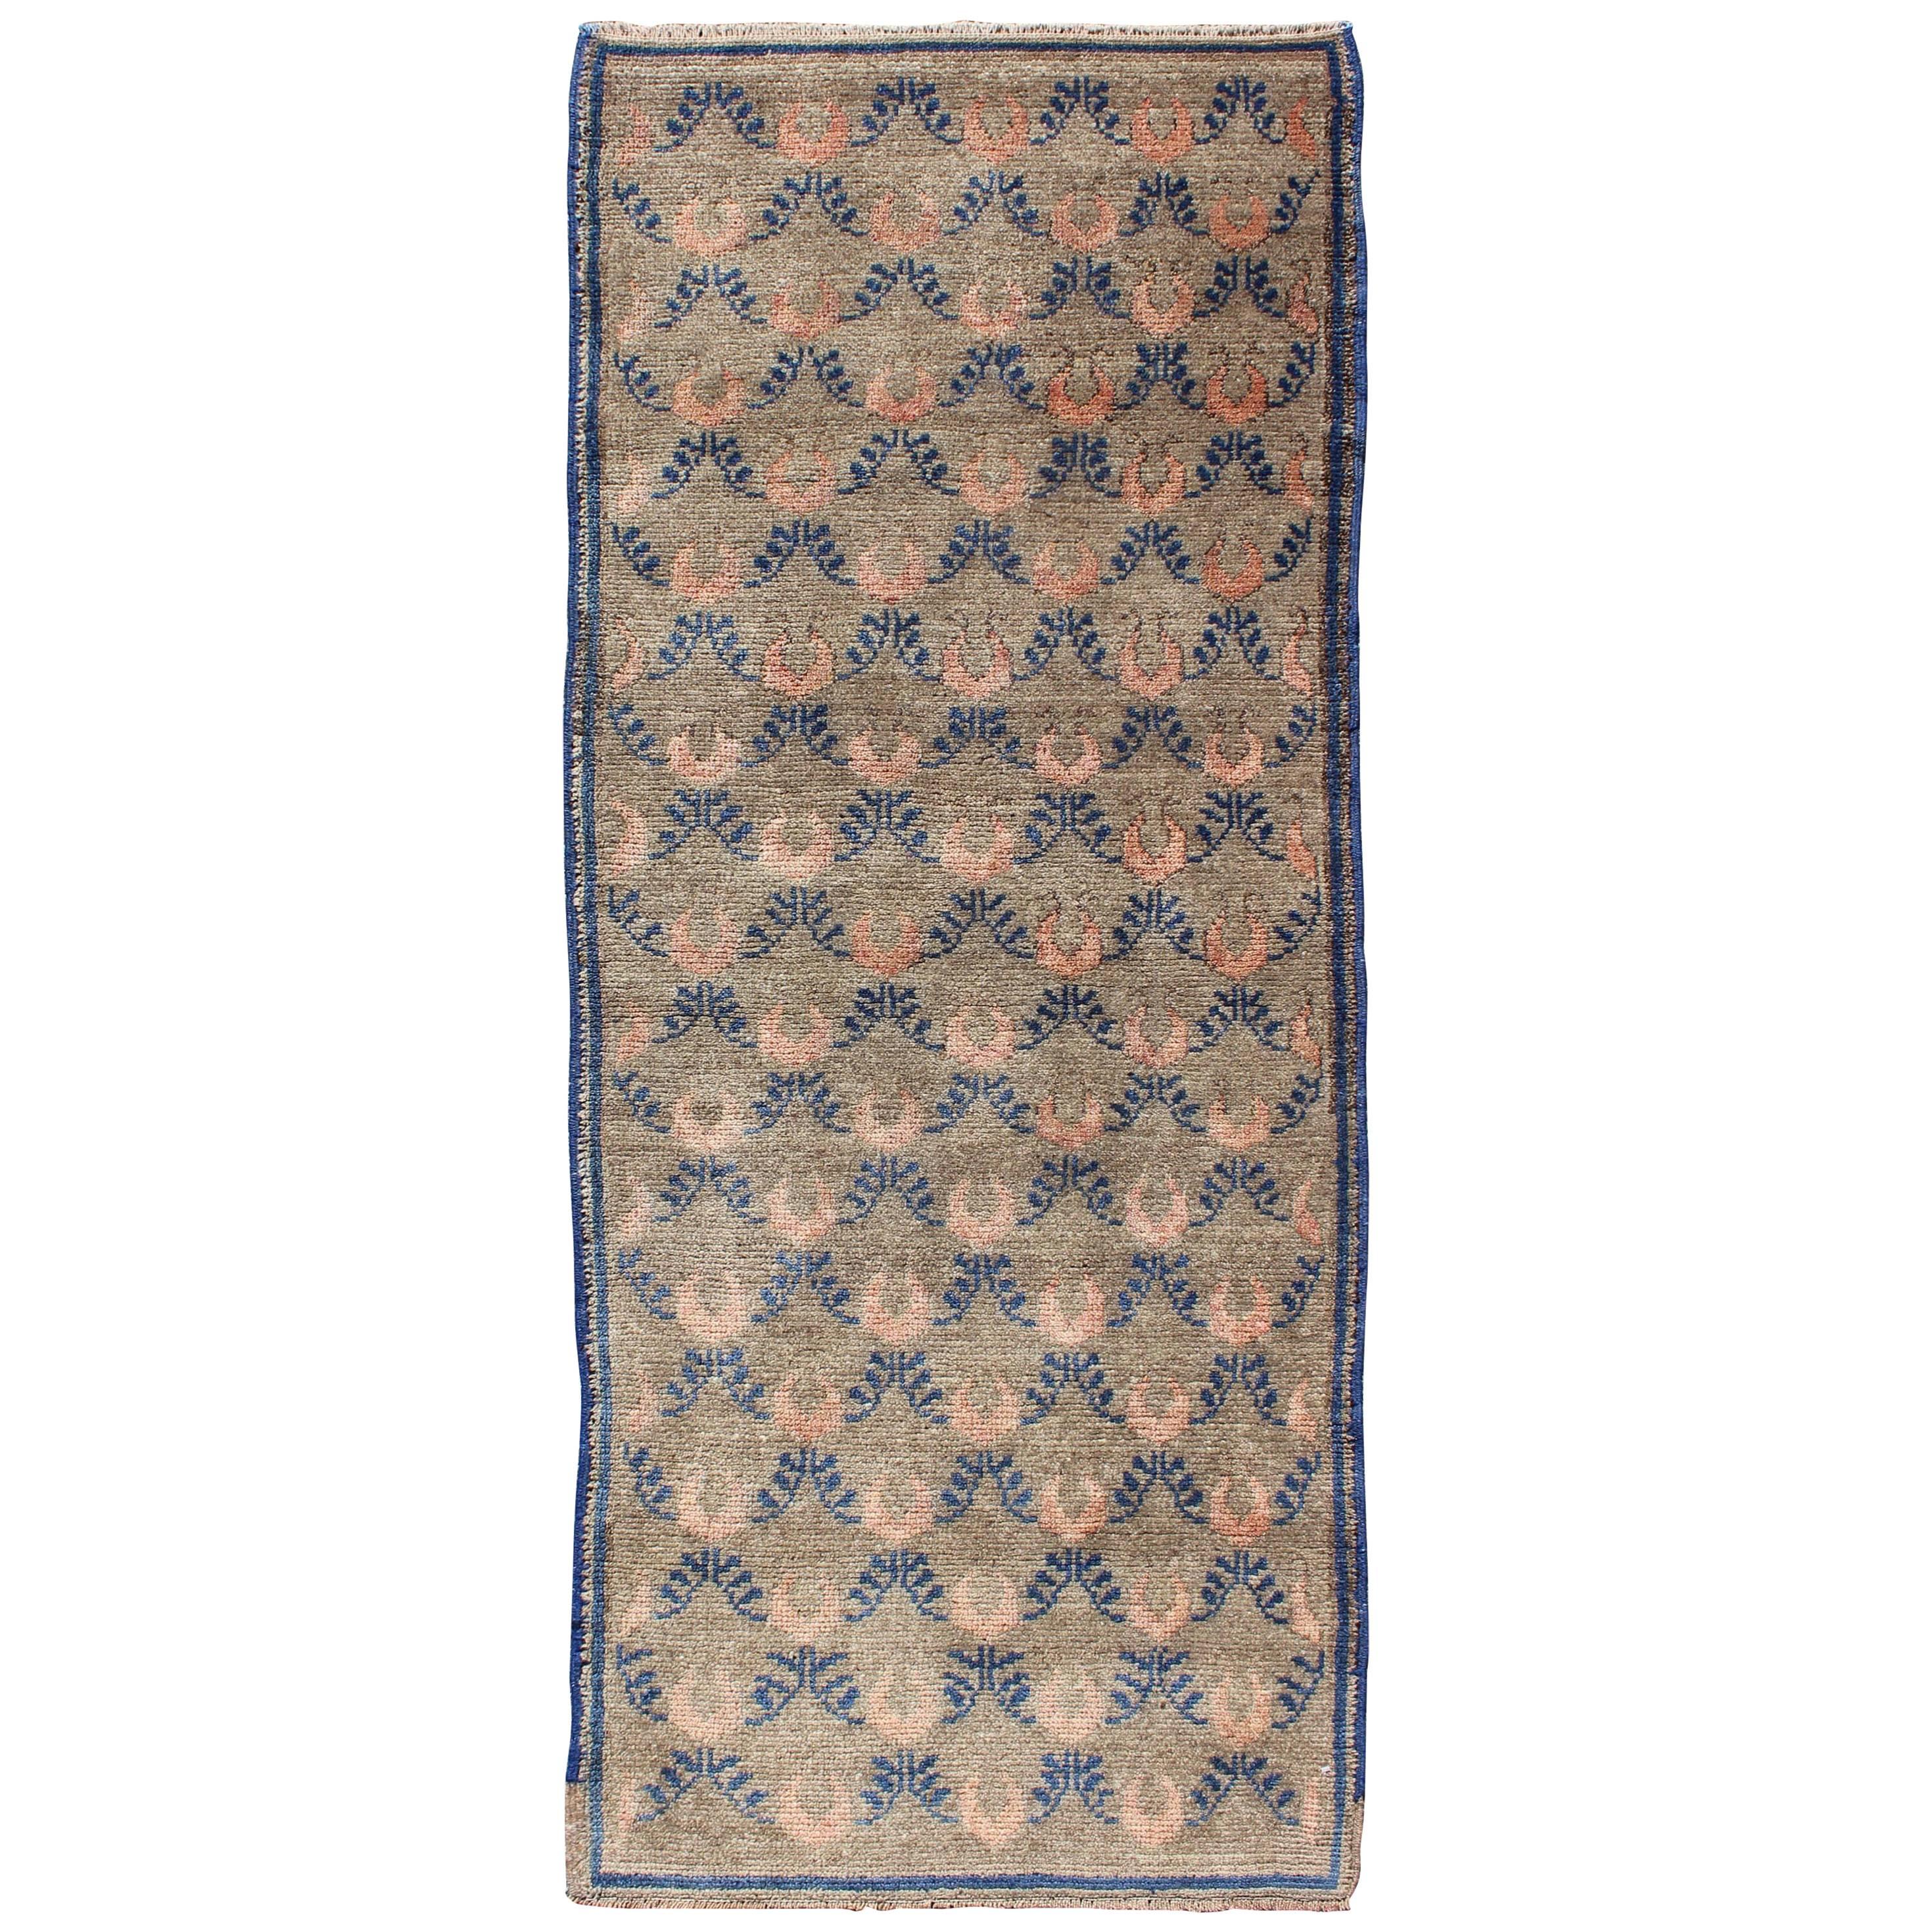 All-Over Vintage Turkish Tulu Rug with Vining Latticework in Tan, Cream and Blue